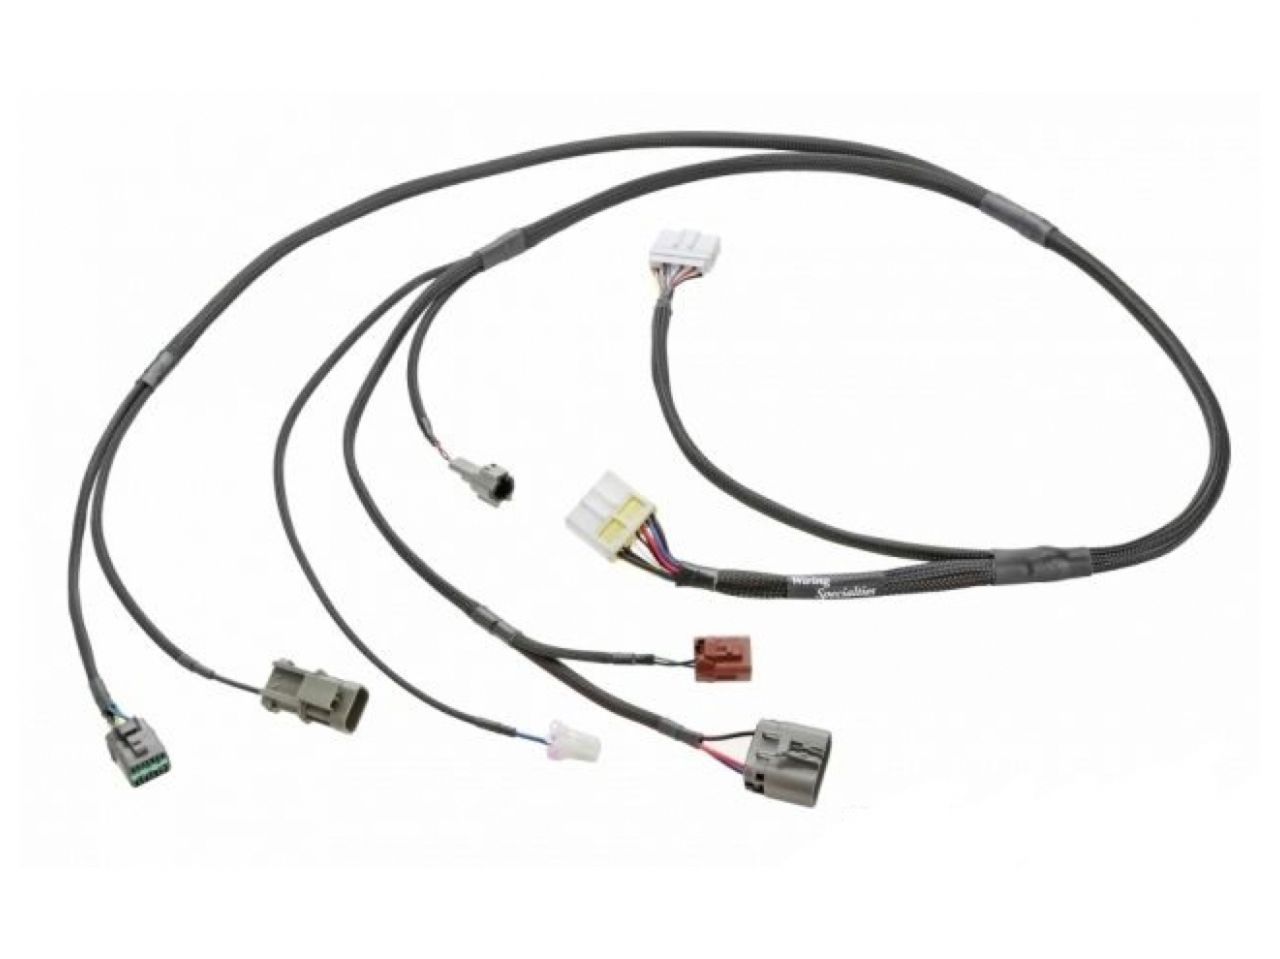 Wiring Specialties S13 SR20DET Wiring Harness for S13 Silvia / 180sx - PRO SERIES